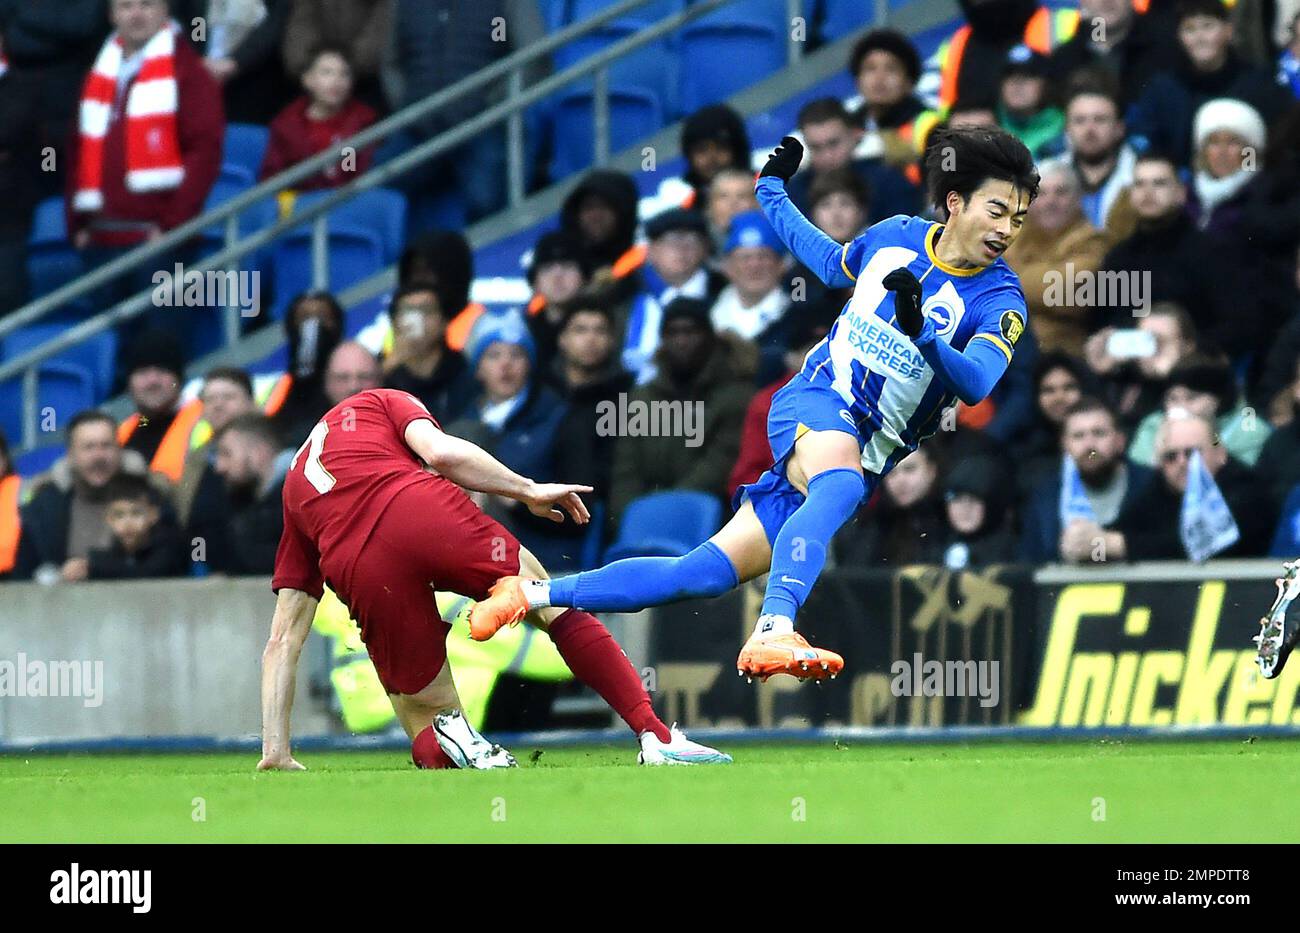 Kaoru Mitoma of Brighton is fouled by James Milner of Liverpool during the Emirates FA Cup Fourth Round match between Brighton & Hove Albion and  Liverpool at The American Express Community Stadium , Brighton , UK - 29th January 2023 Photo Simon Dack/Telephoto Images.  Editorial use only. No merchandising. For Football images FA and Premier League restrictions apply inc. no internet/mobile usage without FAPL license - for details contact Football Dataco Stock Photo